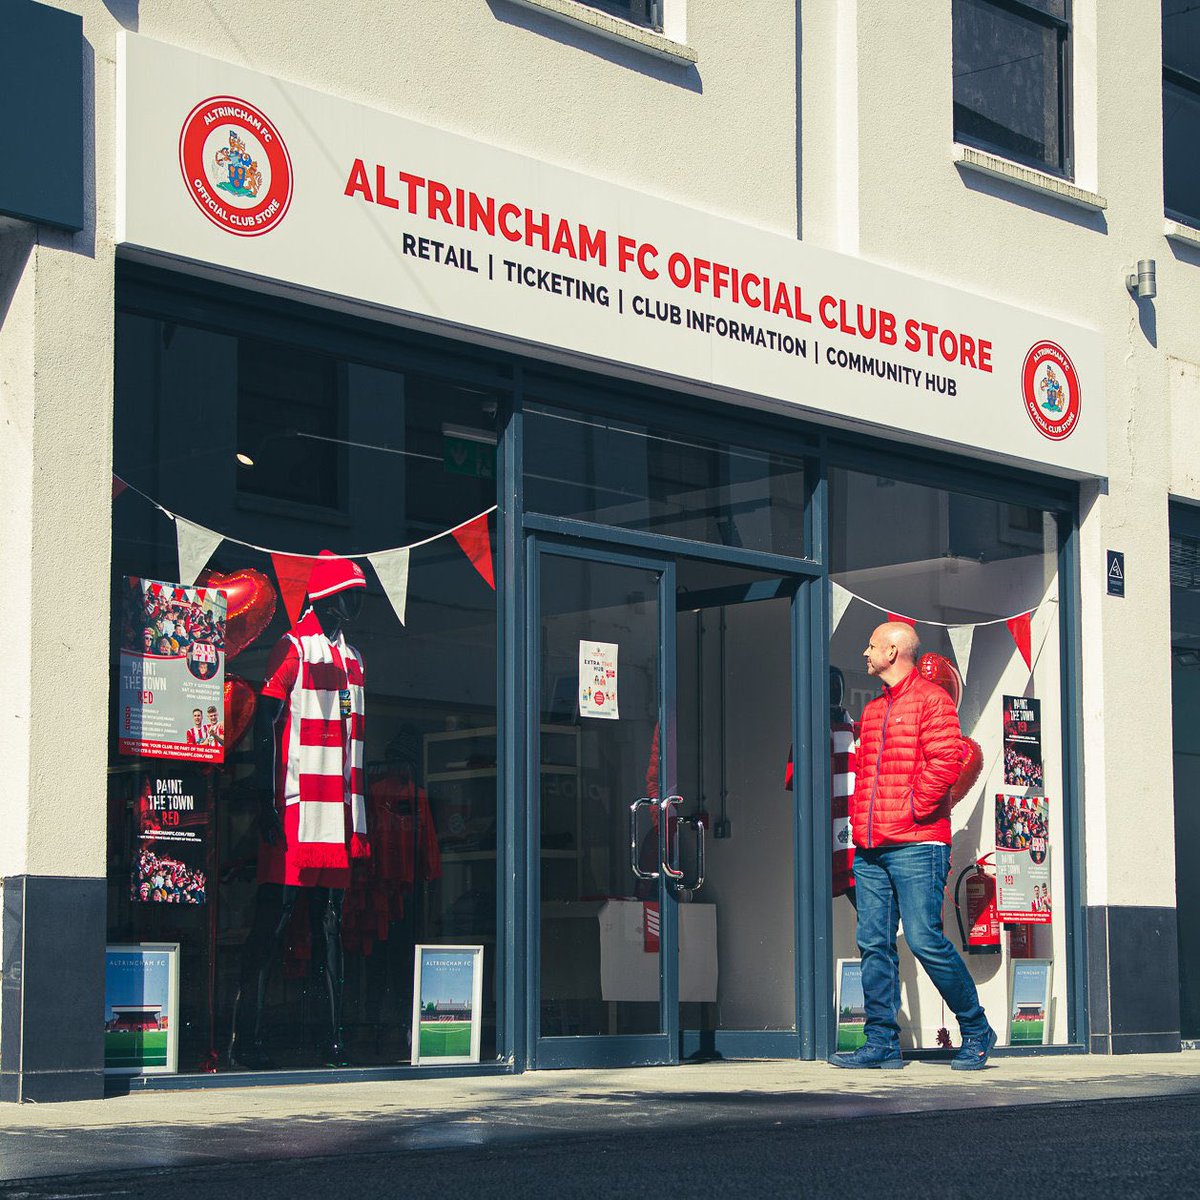 🛍️ Our George Street hub in the @stamfordquarter of #Altrincham town centre is OPEN until 𝟐𝐩𝐦 today 😎 Pop by today and secure yourself a deal on some great Alty merch, with 50% off all remaining 23/24 replica kits 💪 *Limited range of sizes remain